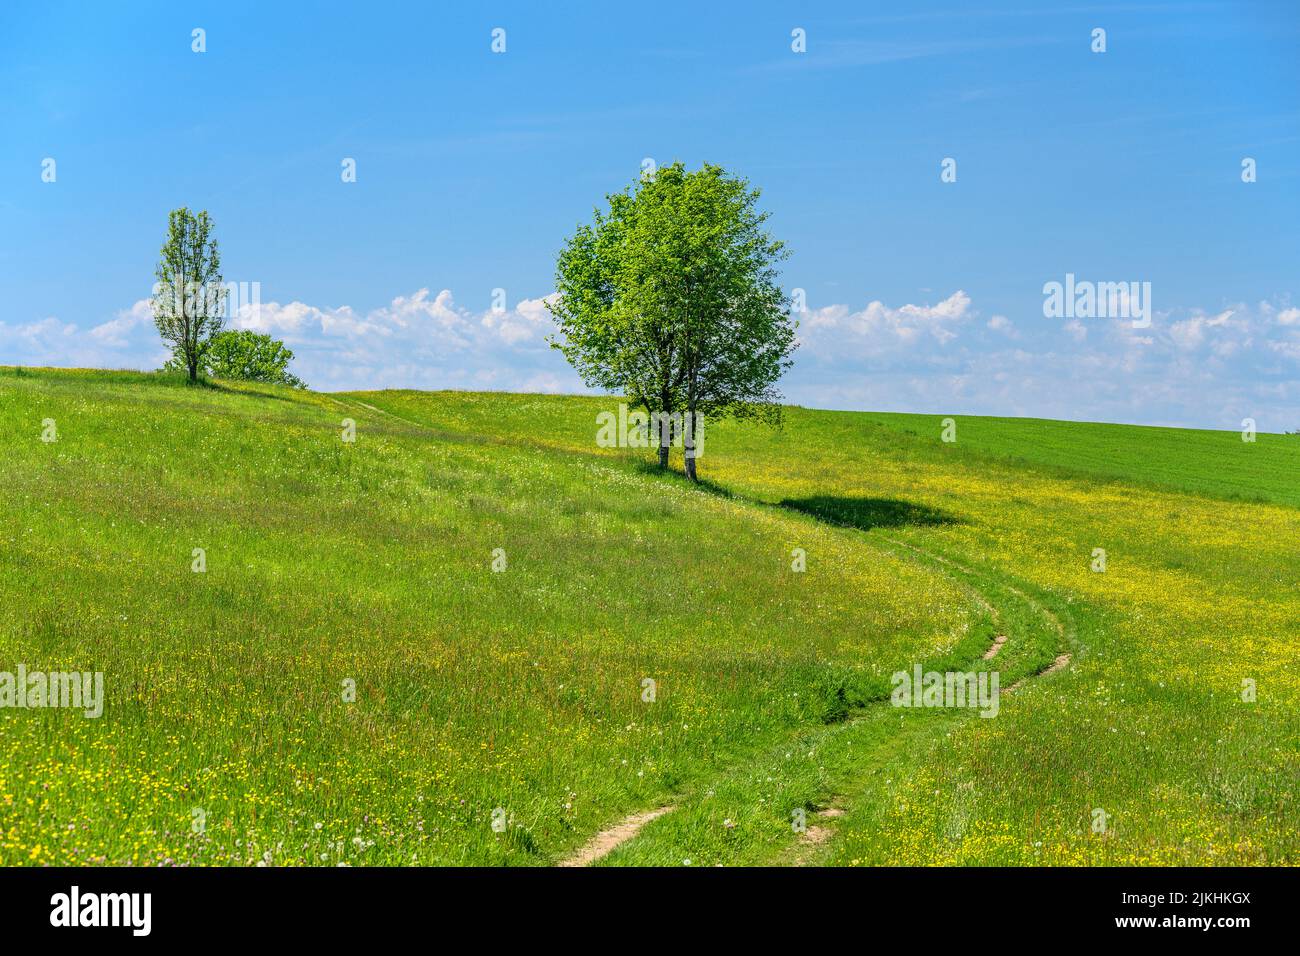 Germany, Bavaria, Starnberg district, Berg, Farchach district, spring meadow Stock Photo